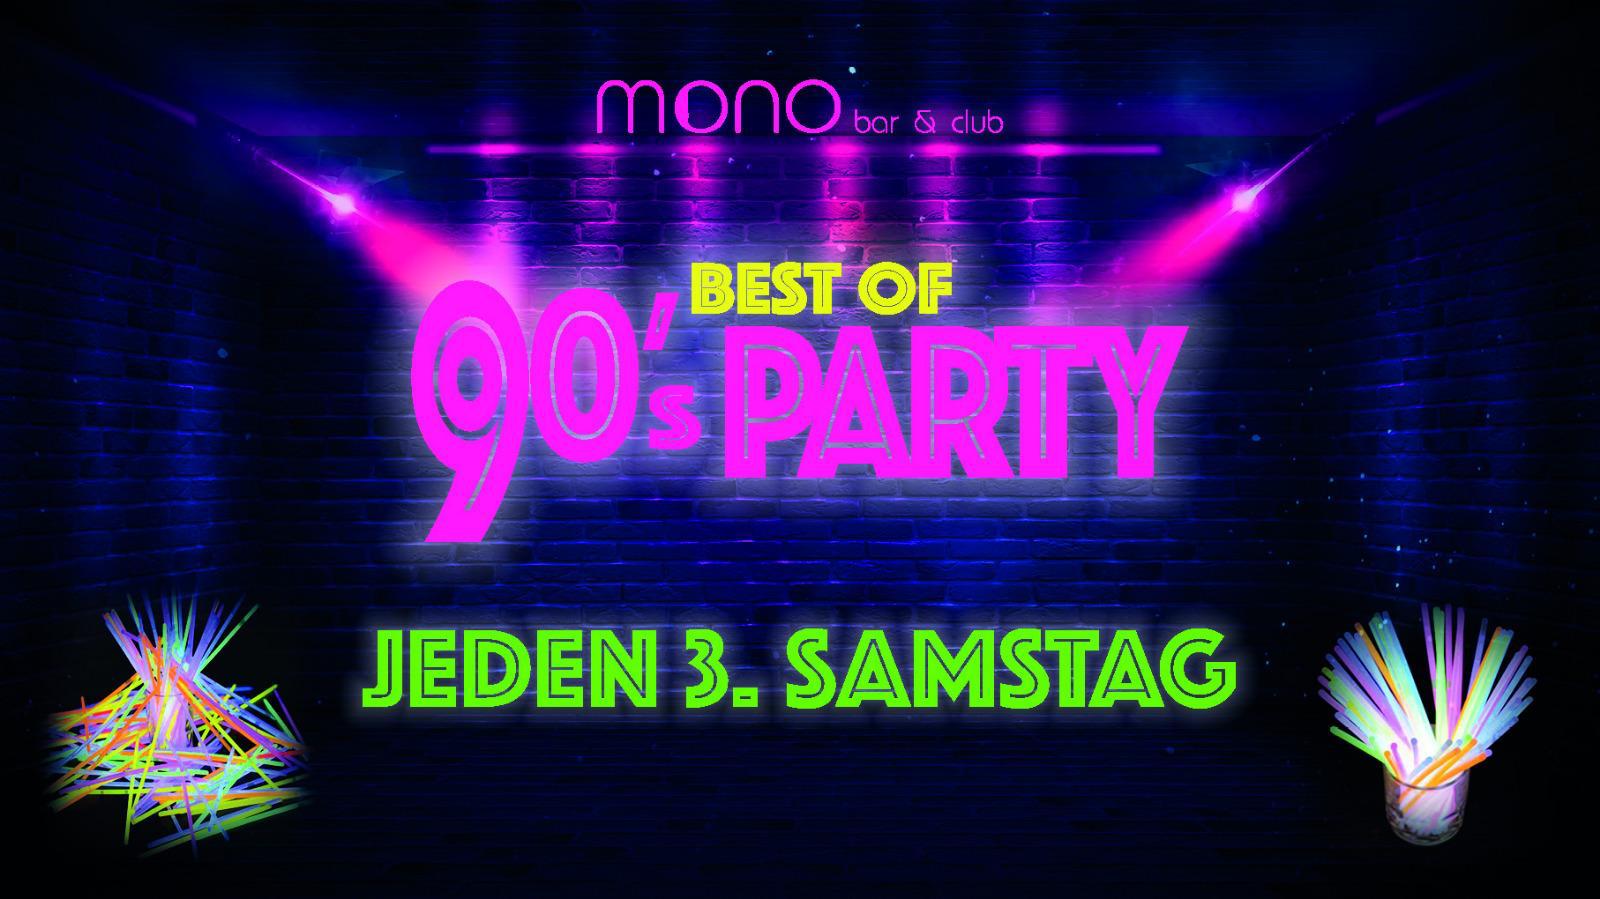 Best of 90s Party